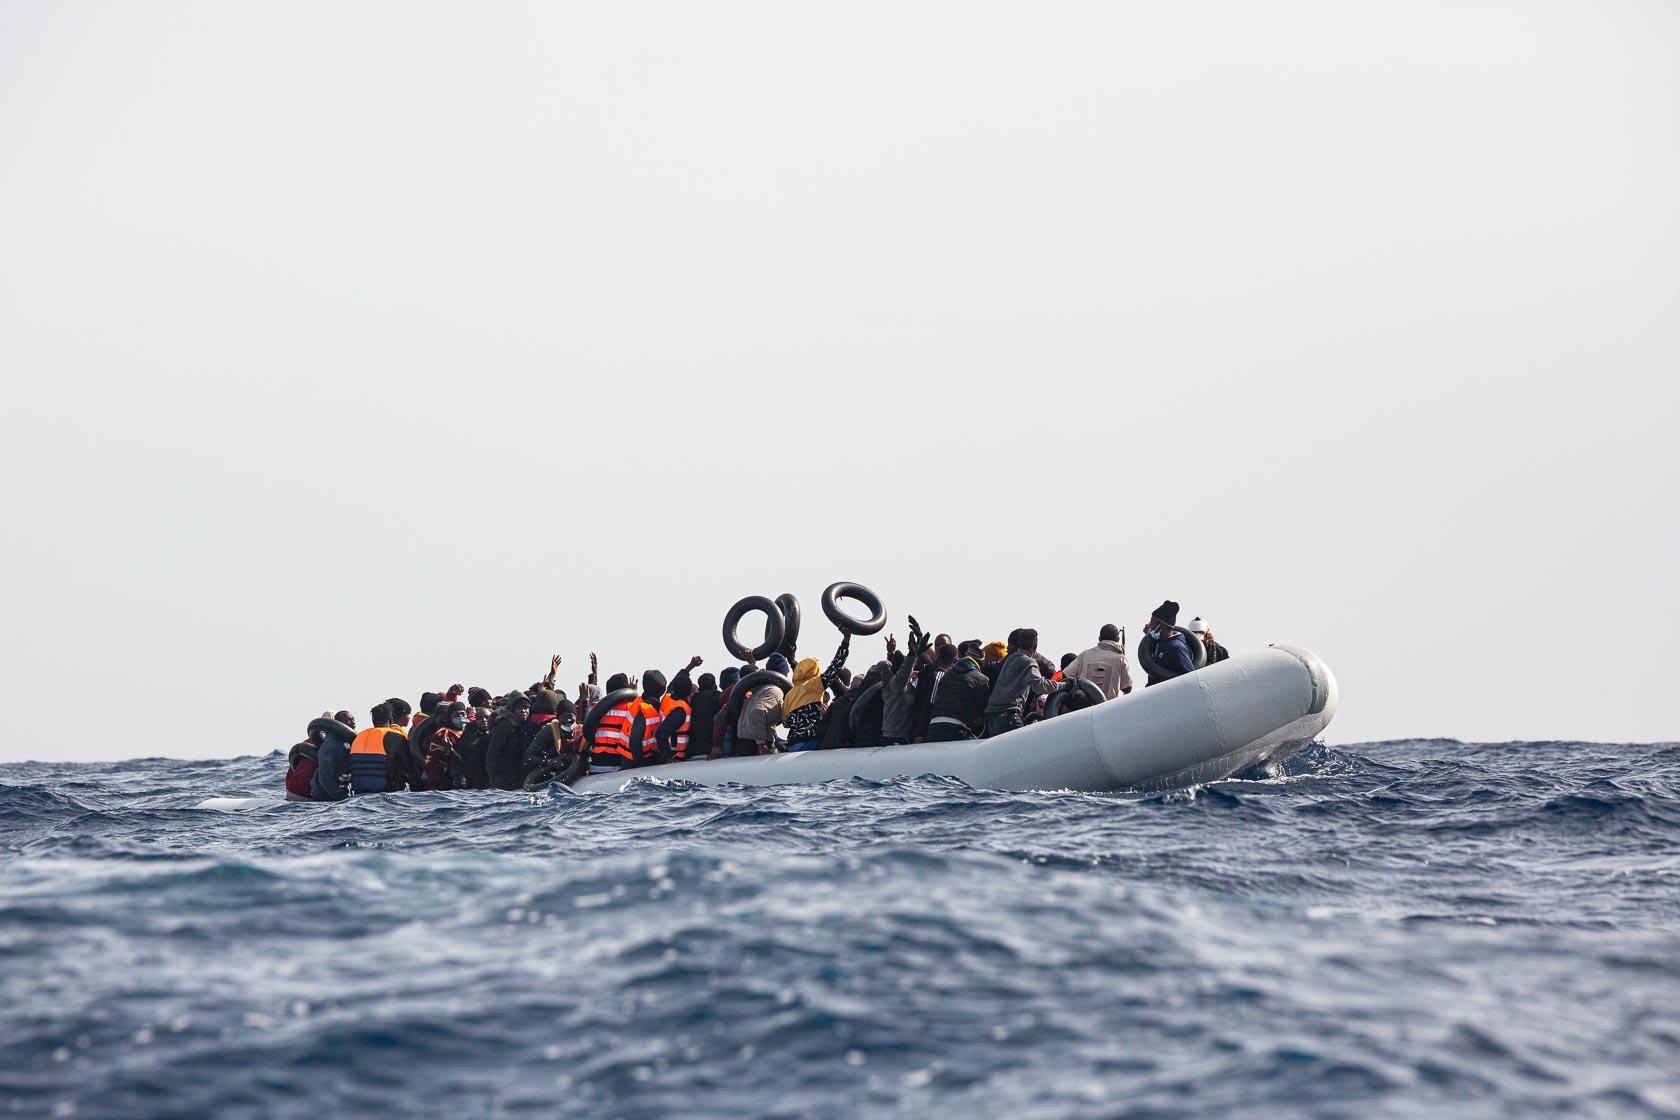 An overcrowded boat with more than 100 people on board is about to be rescued by the teams of the Ocean Viking, the search and rescue vessel of SOS Méditerranée. Central Mediterranean - April 2021